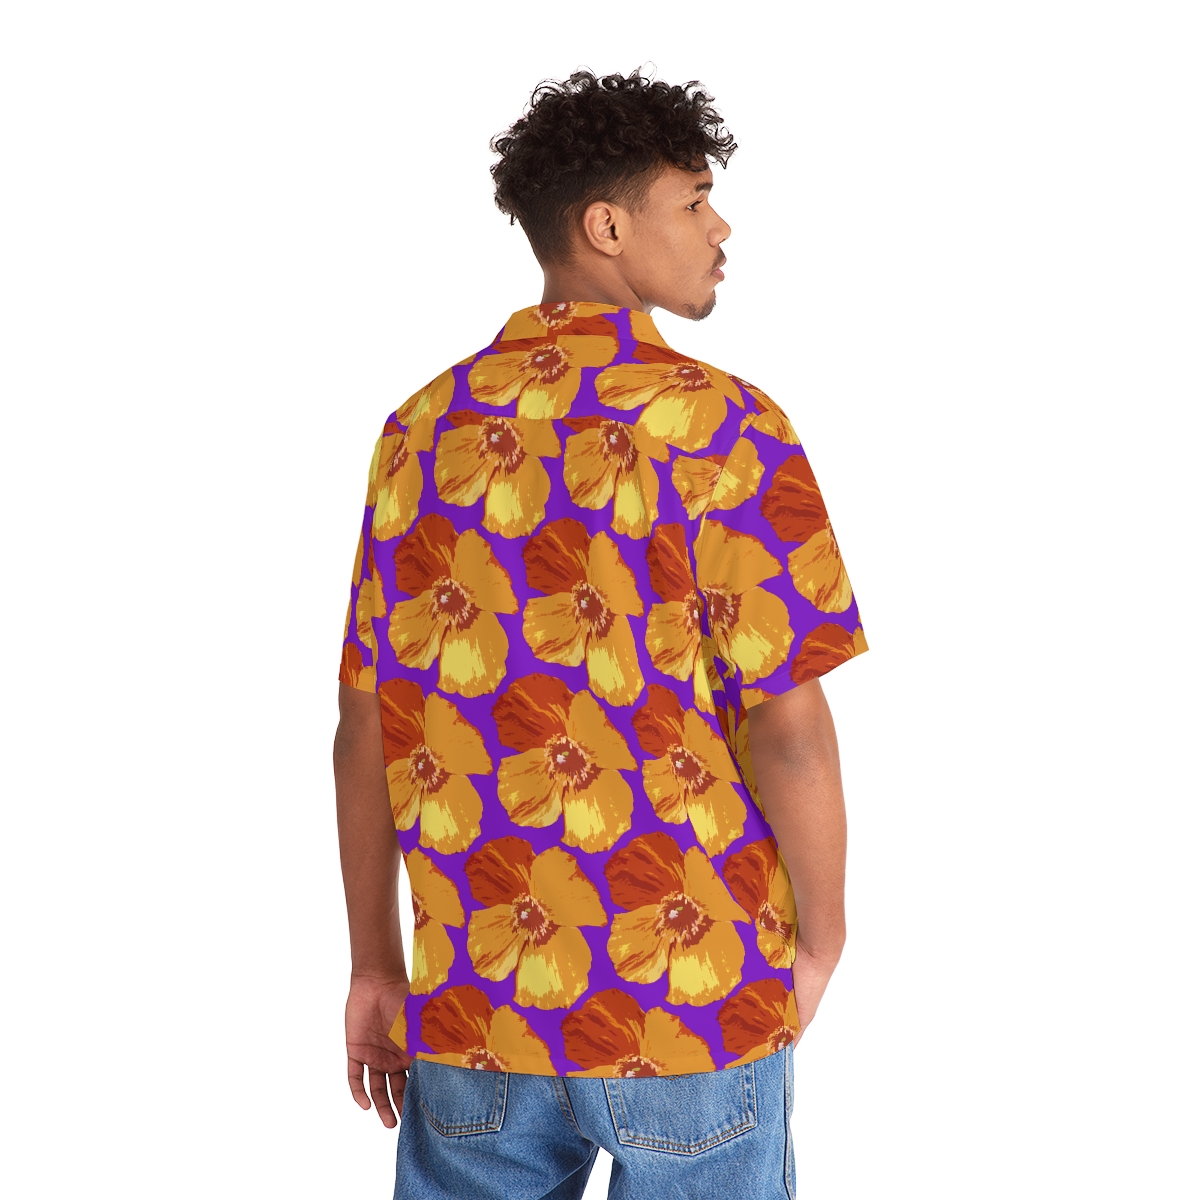 If you love flowers and Hawaiian shirts then our latest product is right up your street!

You can even customise the colours!

mark-reeves-artworks.co.uk/index.php?cPat…

#Hawaiianshirt #orangepoppy #summershirt #purple #Welshpoppy #SB🚀 #giftforhim